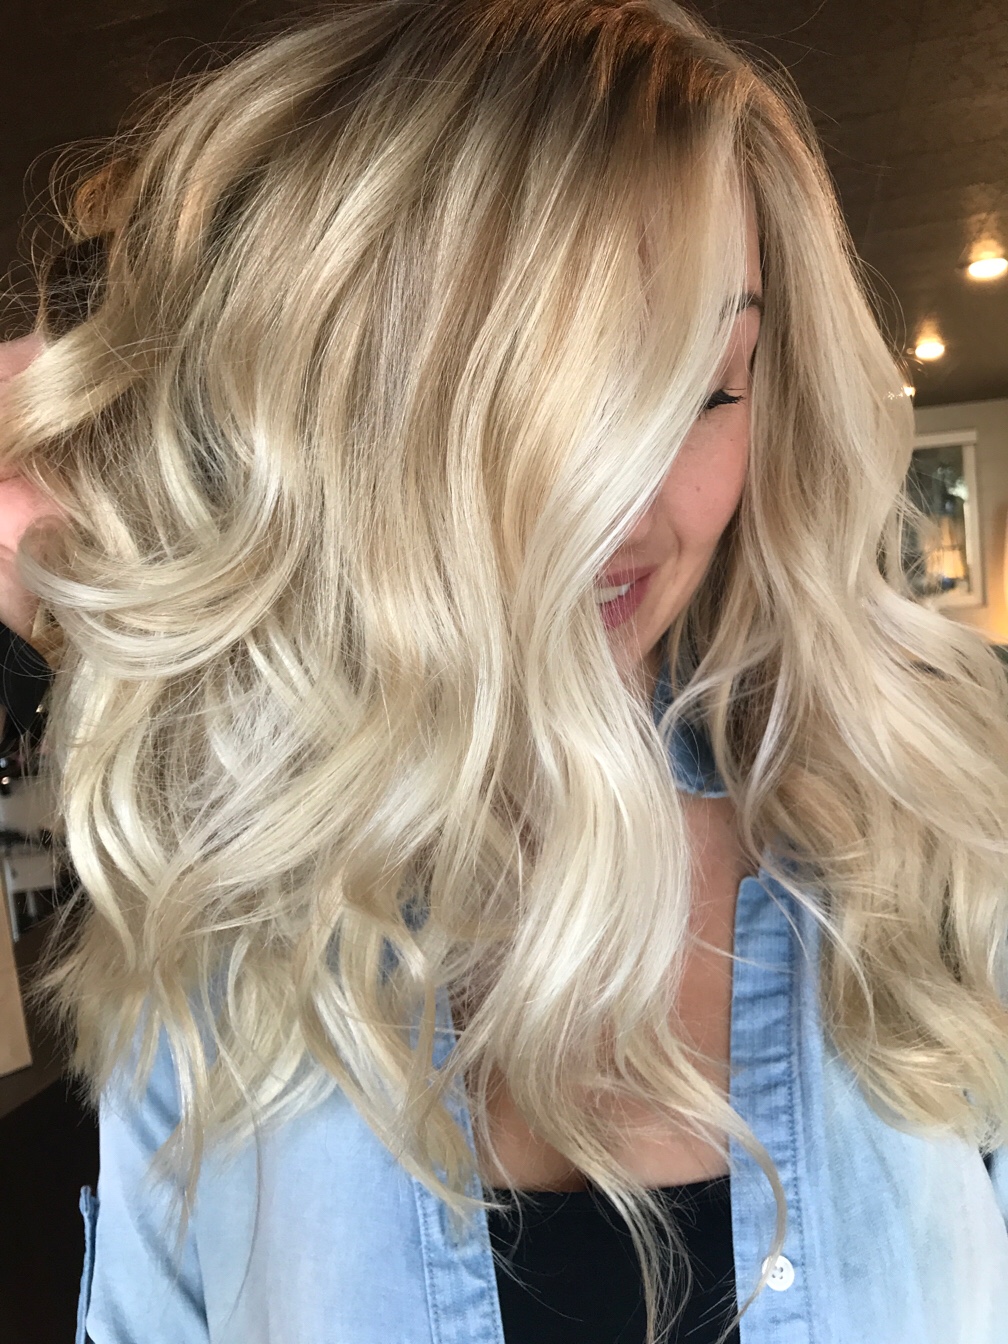 Blonde By Noon At Lather Salon & Spa In Coeur D Alene ID | Vagaro